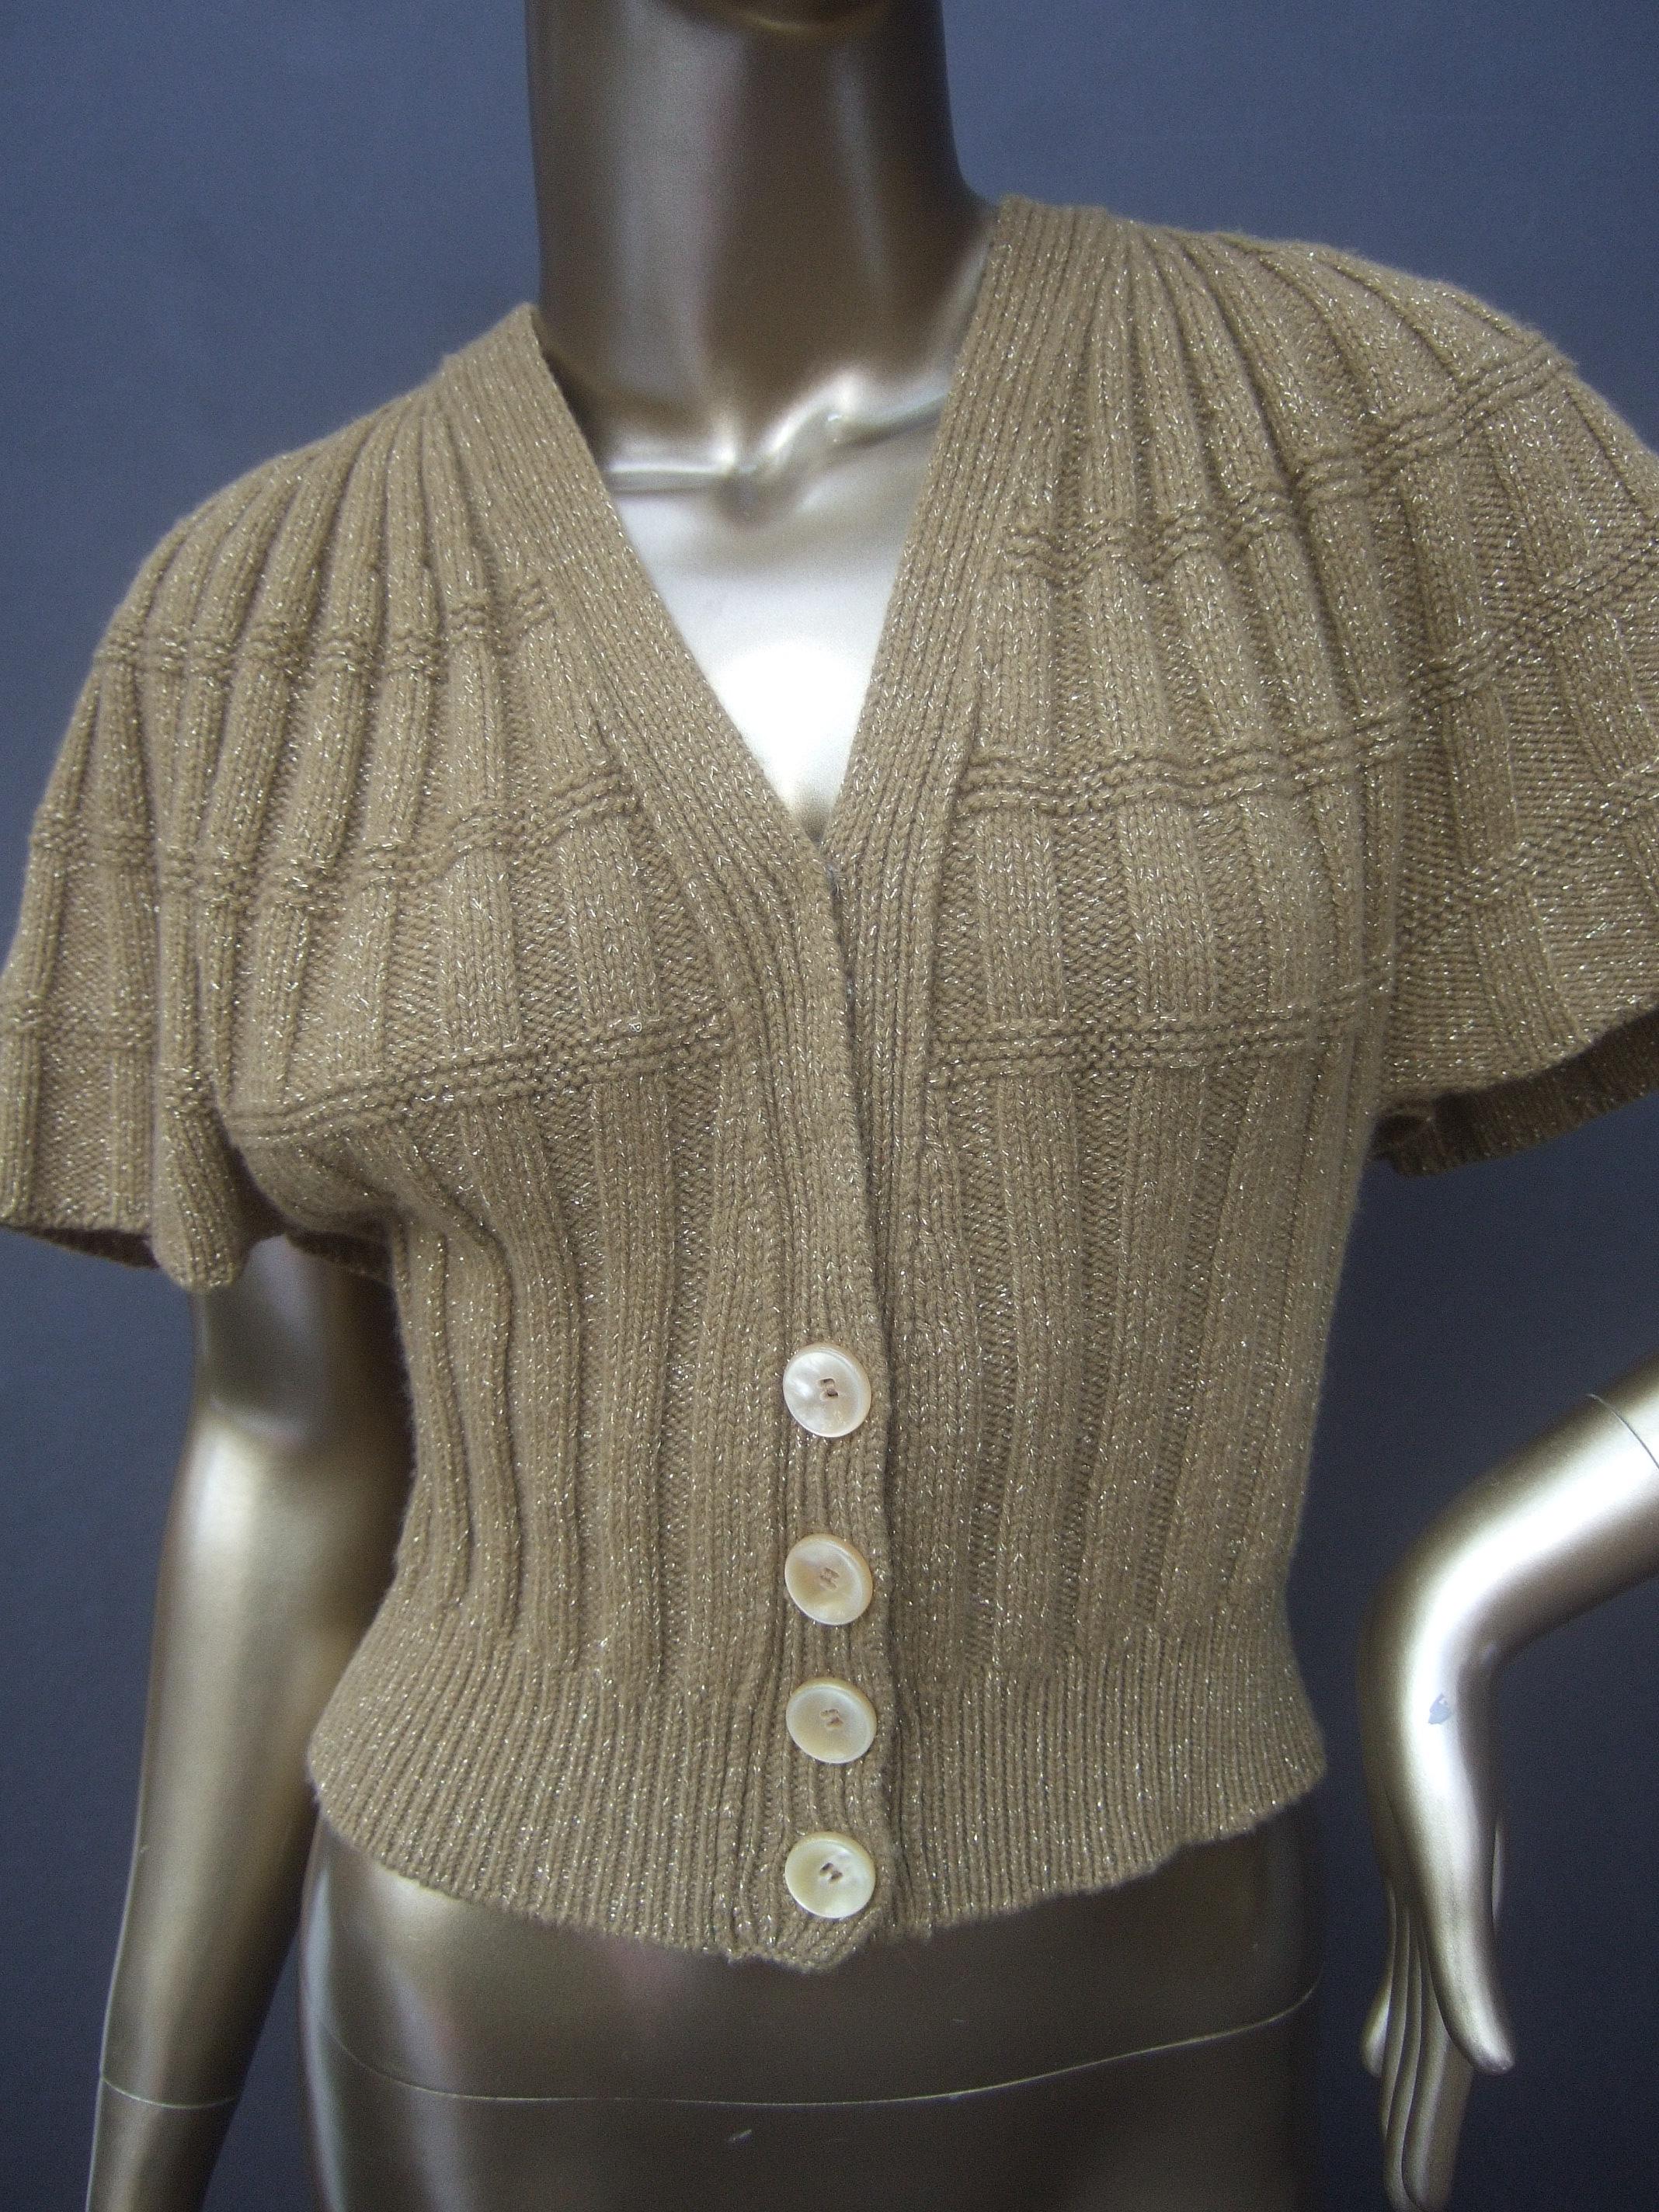 Louis Vuitton Paris Italian Knit Brown Cardigan c 21st c In Good Condition For Sale In University City, MO